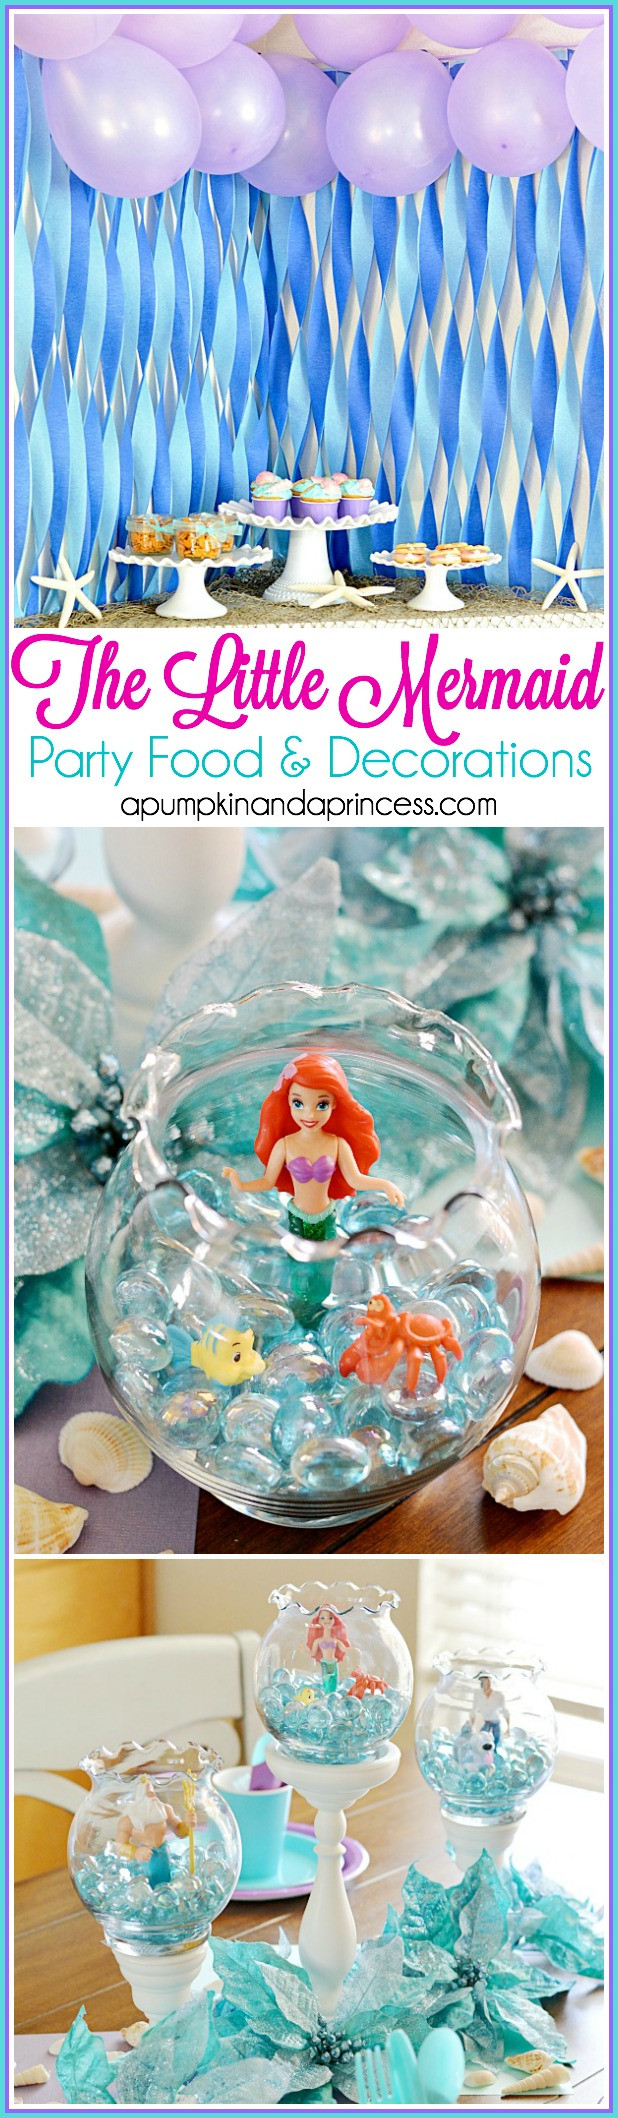 Ideas For A Mermaid Birthday Party
 The Little Mermaid Party A Pumpkin And A Princess